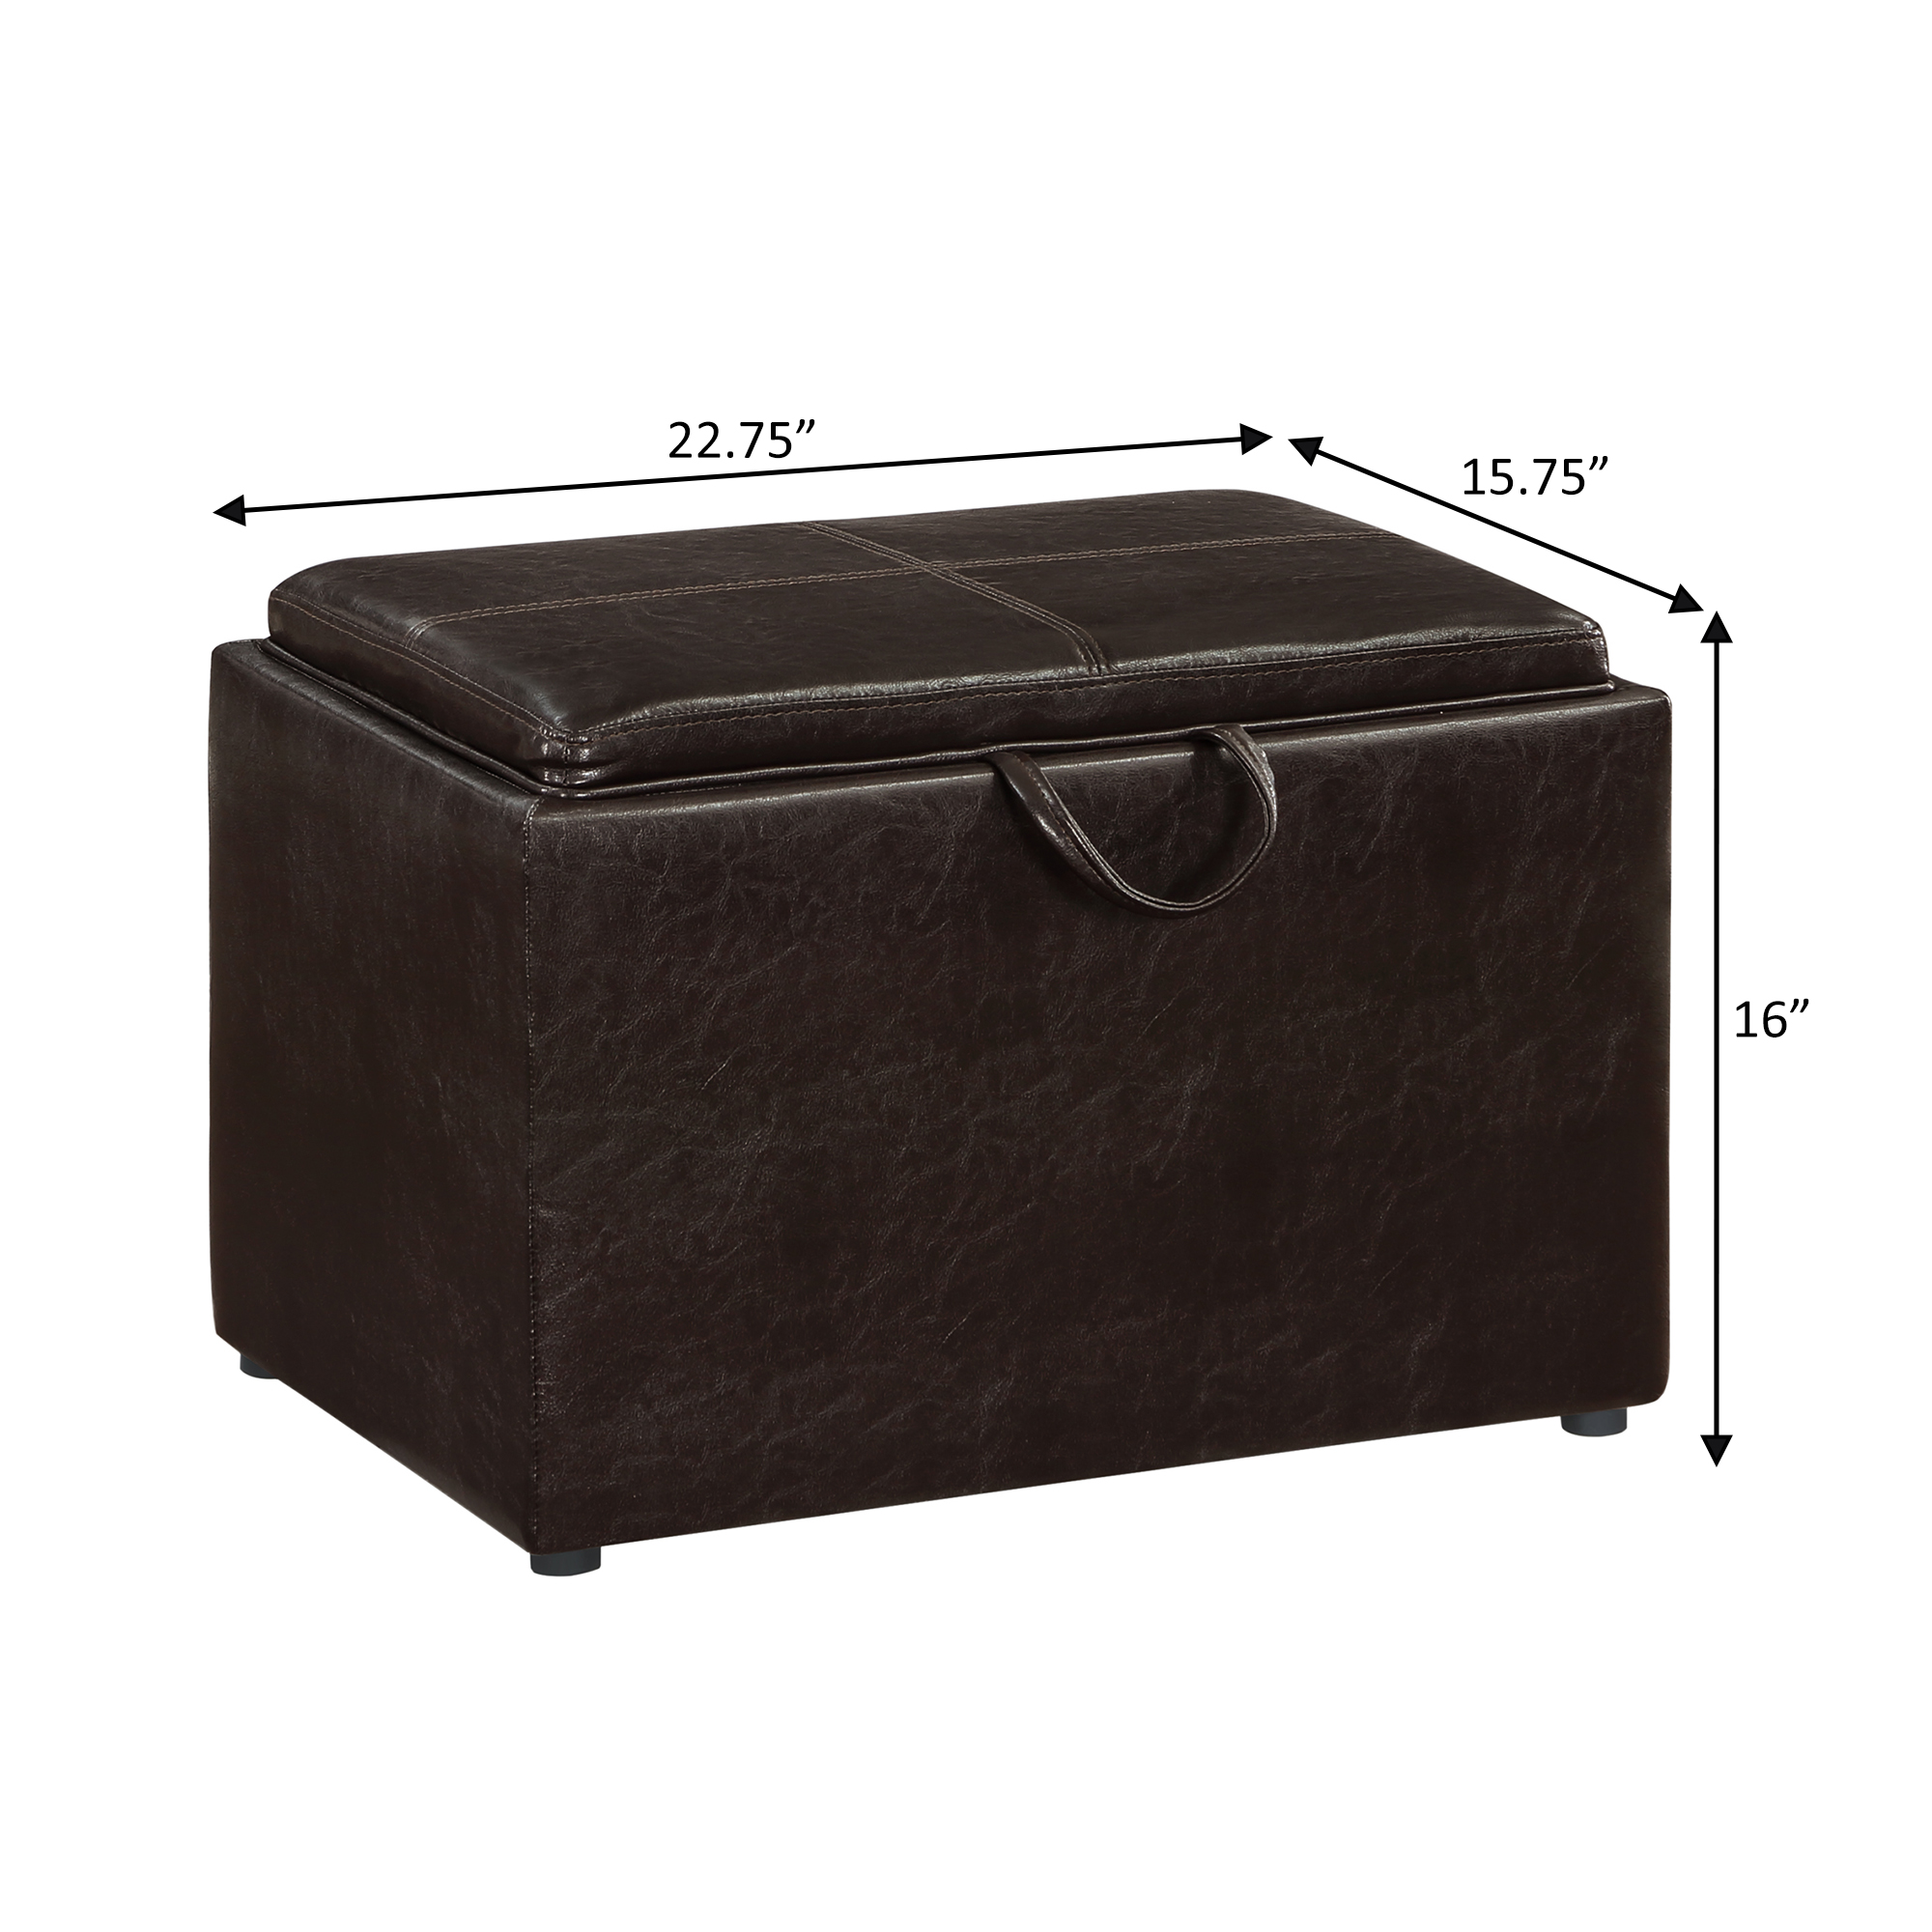 Convenience Concepts Designs4Comfort Accent Storage Ottoman with Reversible Tray, Espresso Faux Leather - image 4 of 8